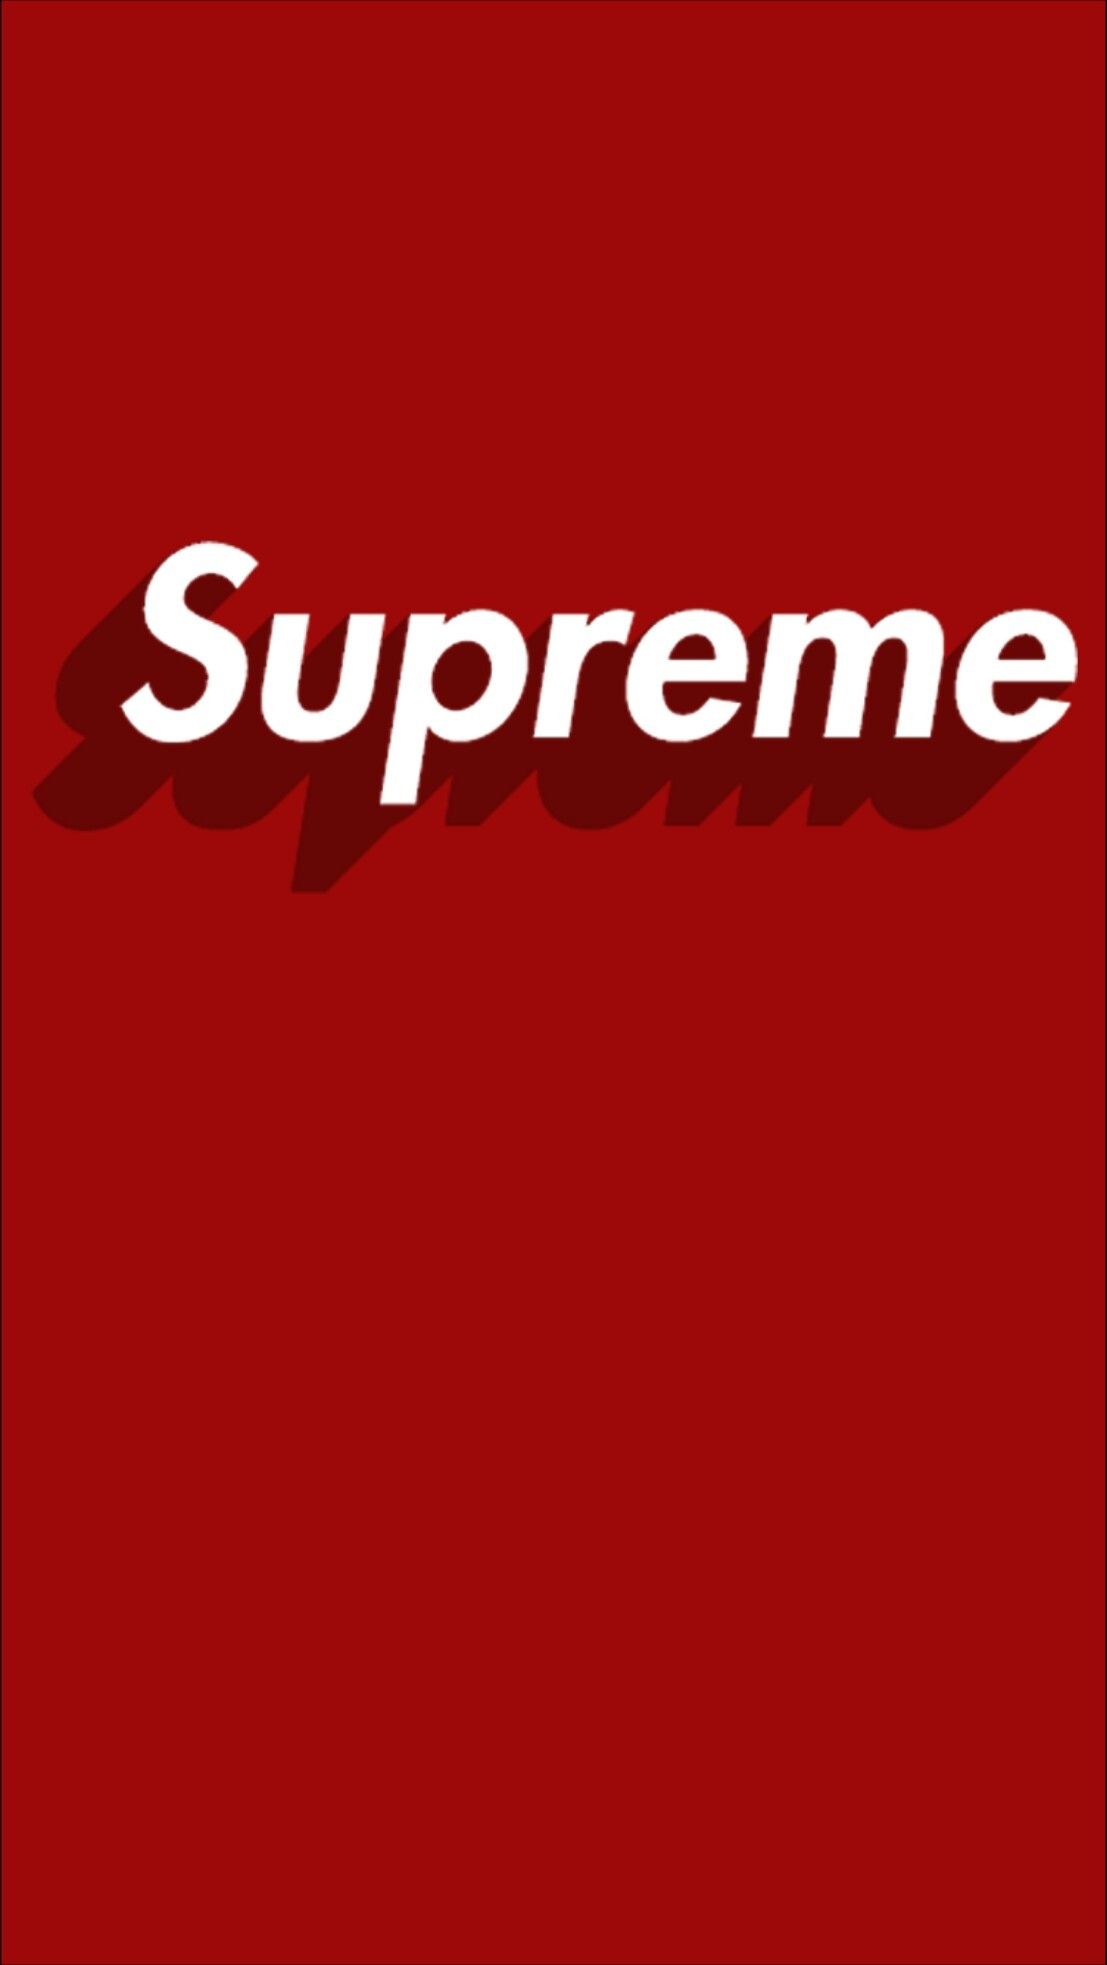 Supreme Iphone 6 Wallpapers